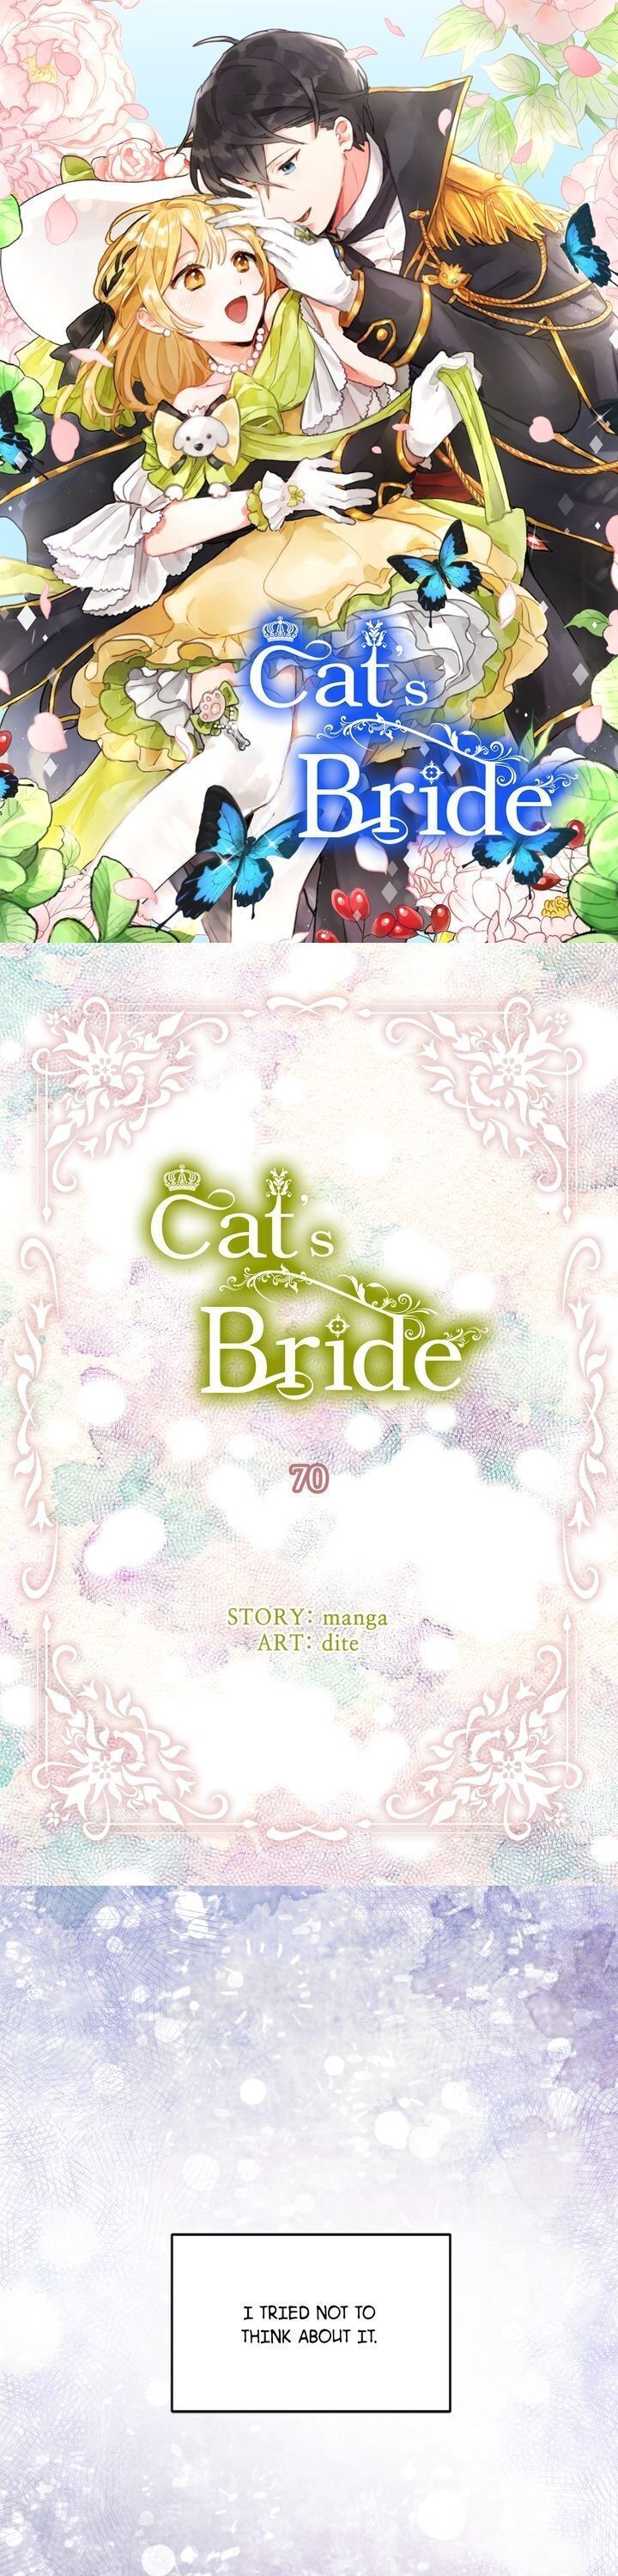 Cat's Bride Chapter 70 page 1